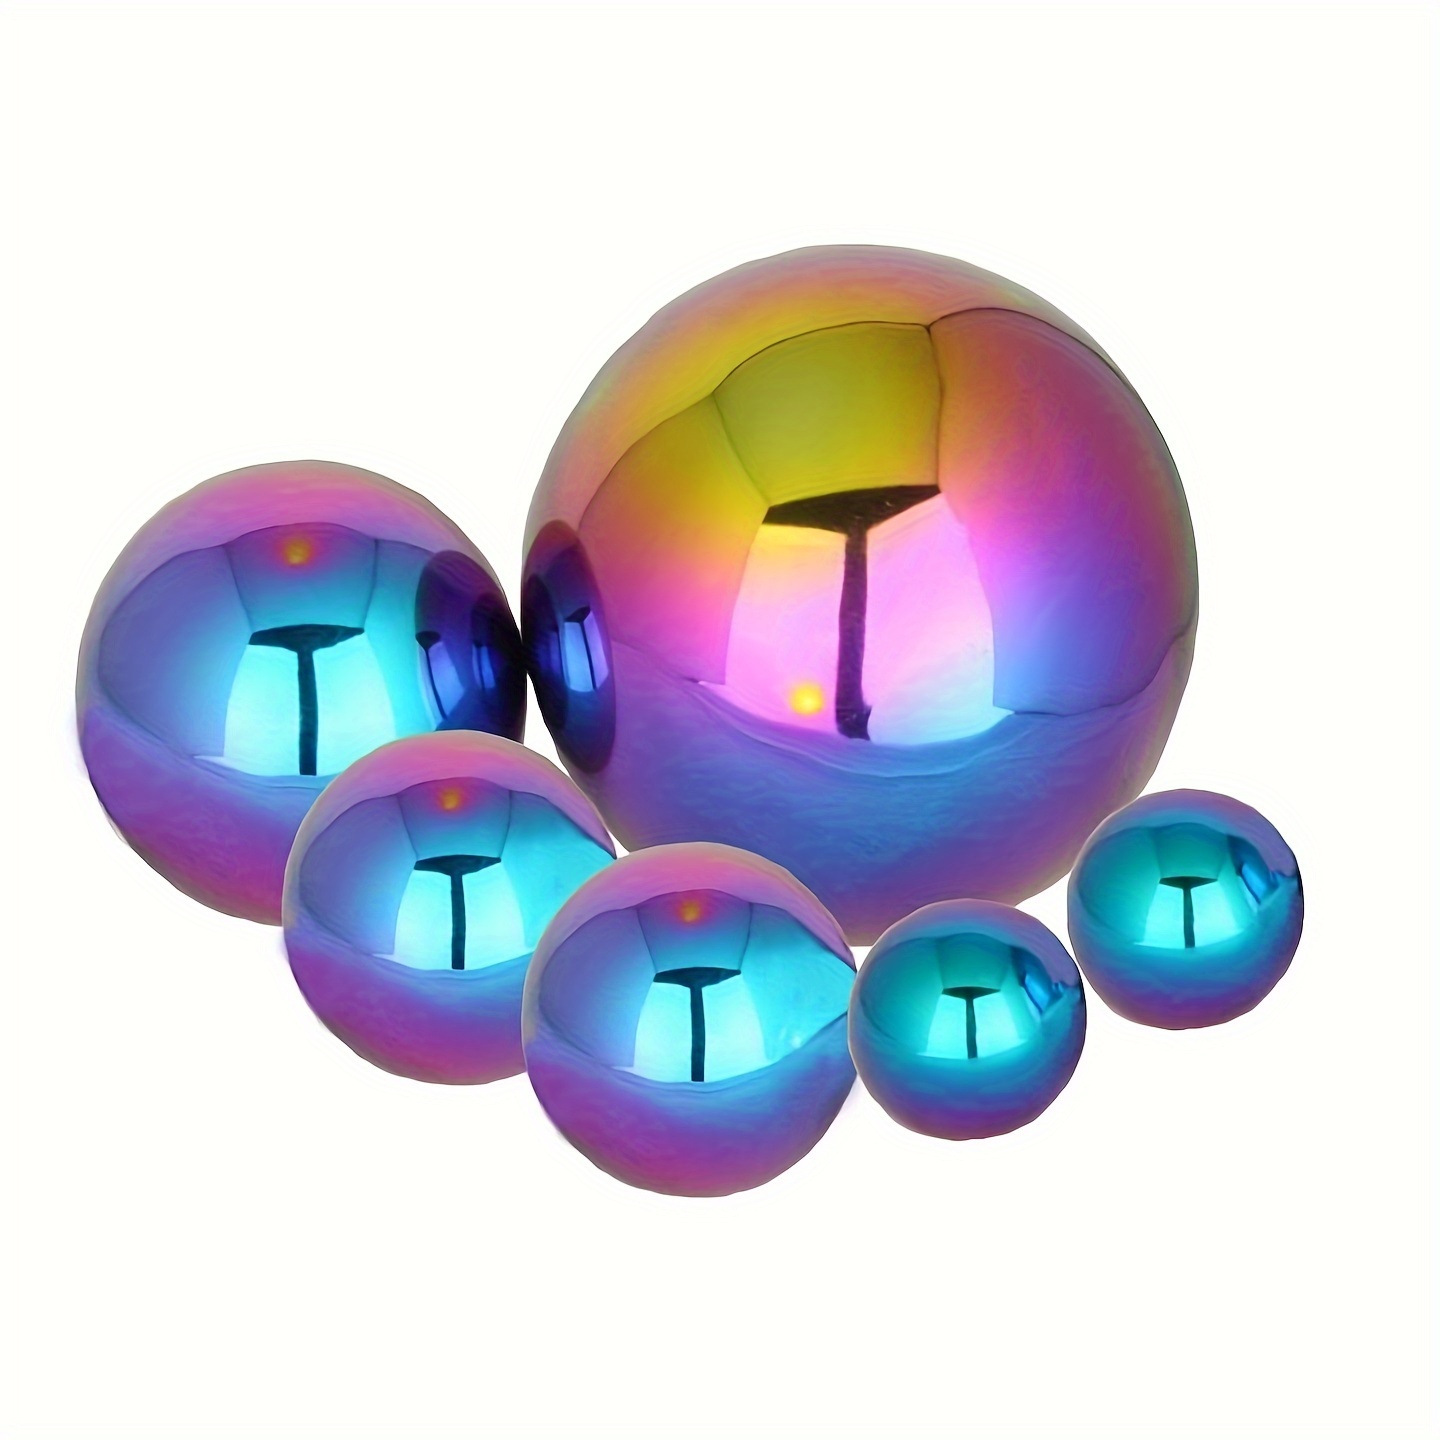 

6pcs, Stainless Steel Gazing Ball, Multicoloured Mirror Polished Hollow Ball Reflective Garden Ball, Pre-drilled Gazing Globe For Home Garden Ornament Decorations